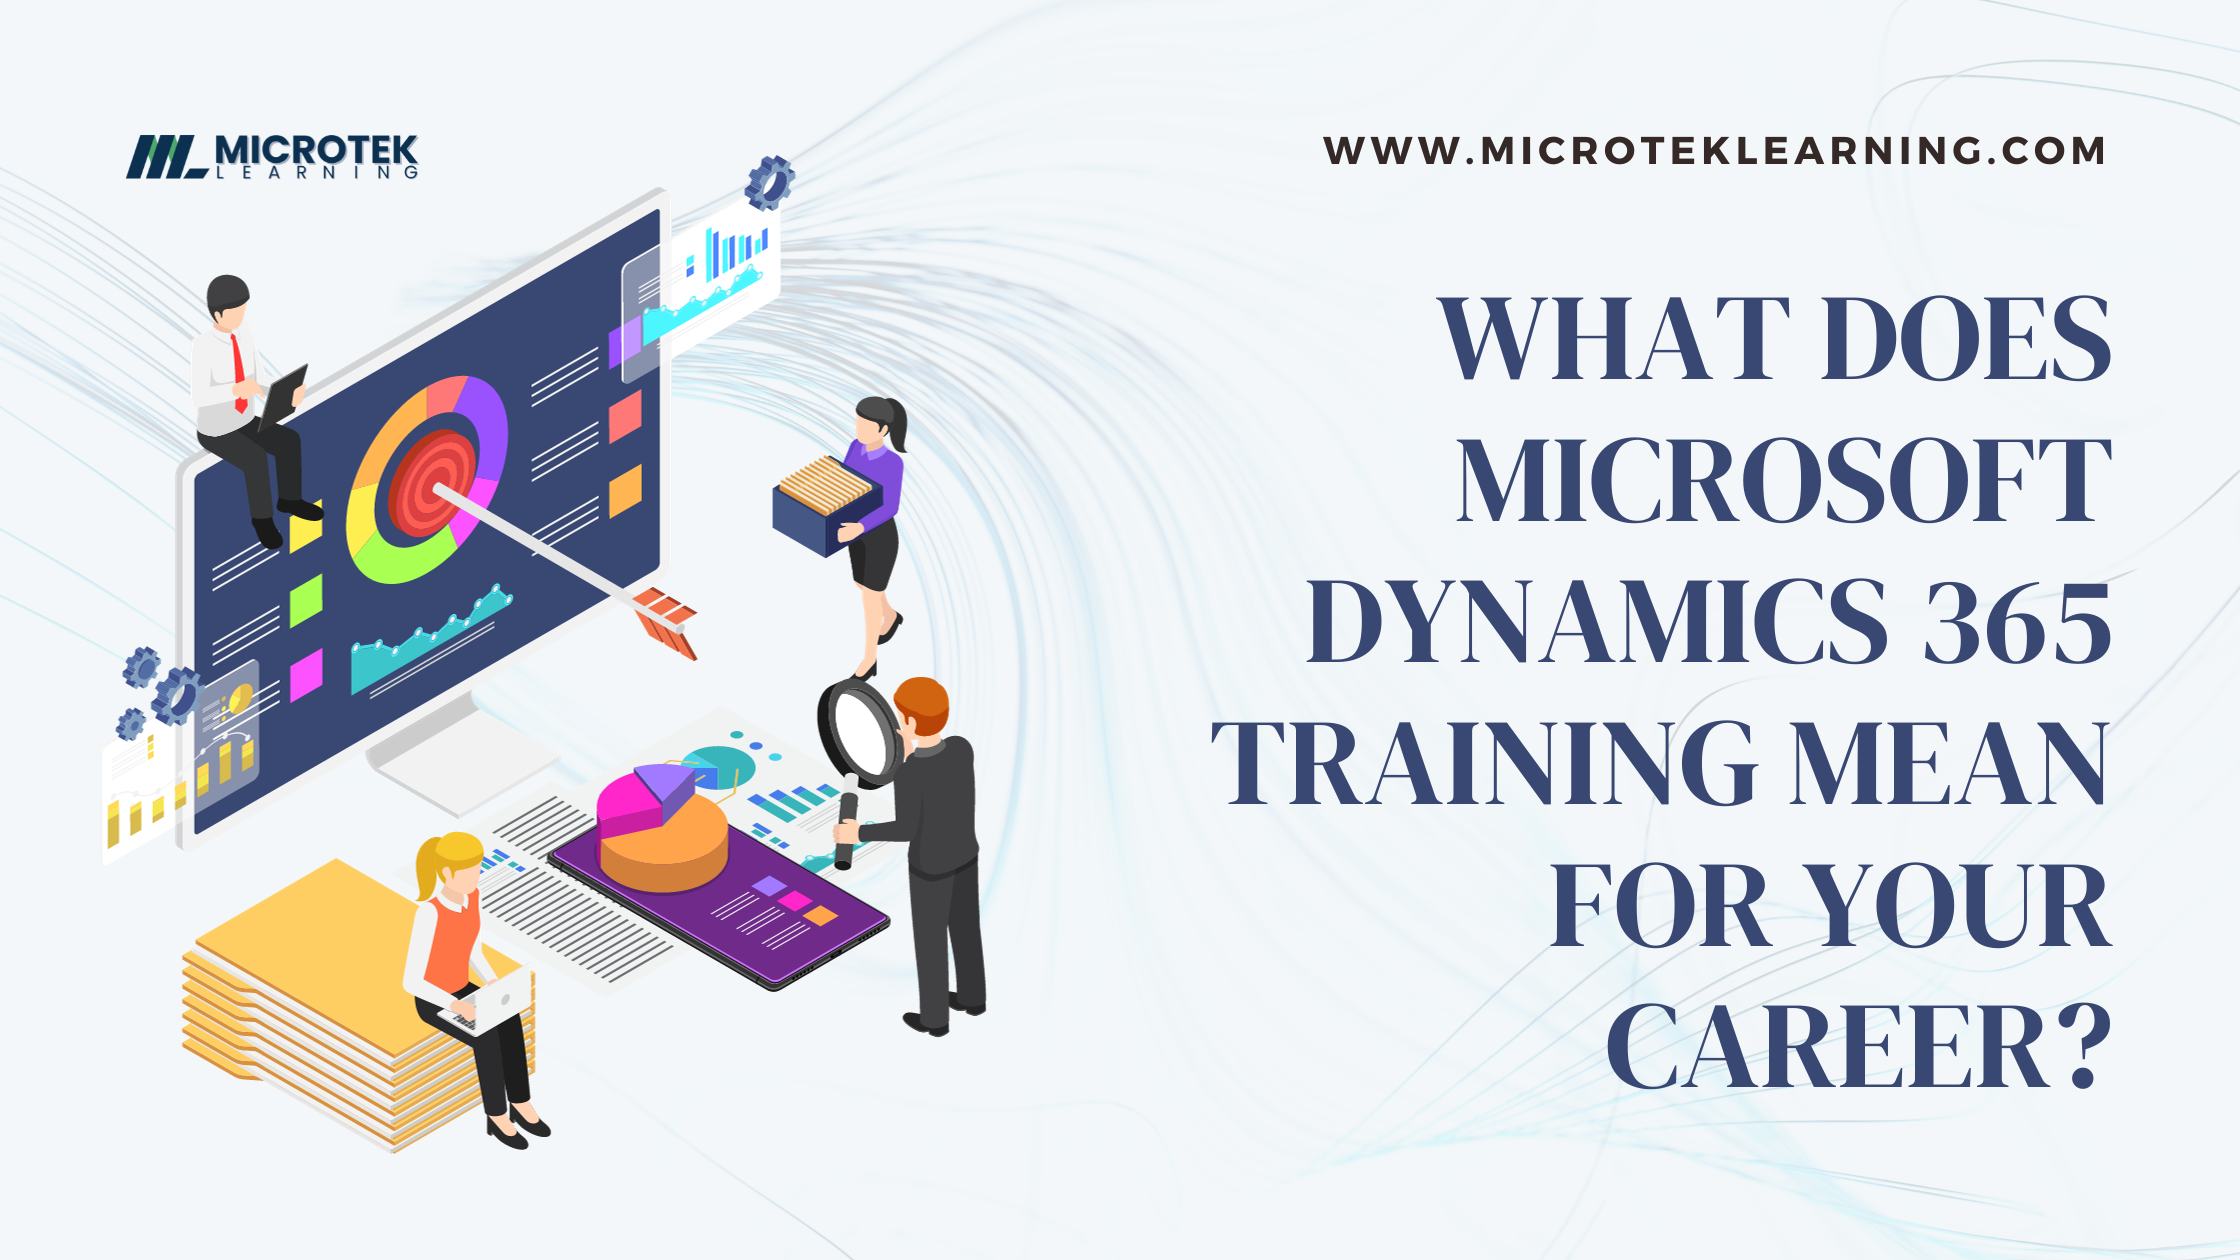 What Does Microsoft Dynamics 365 Training Mean for Your Career?